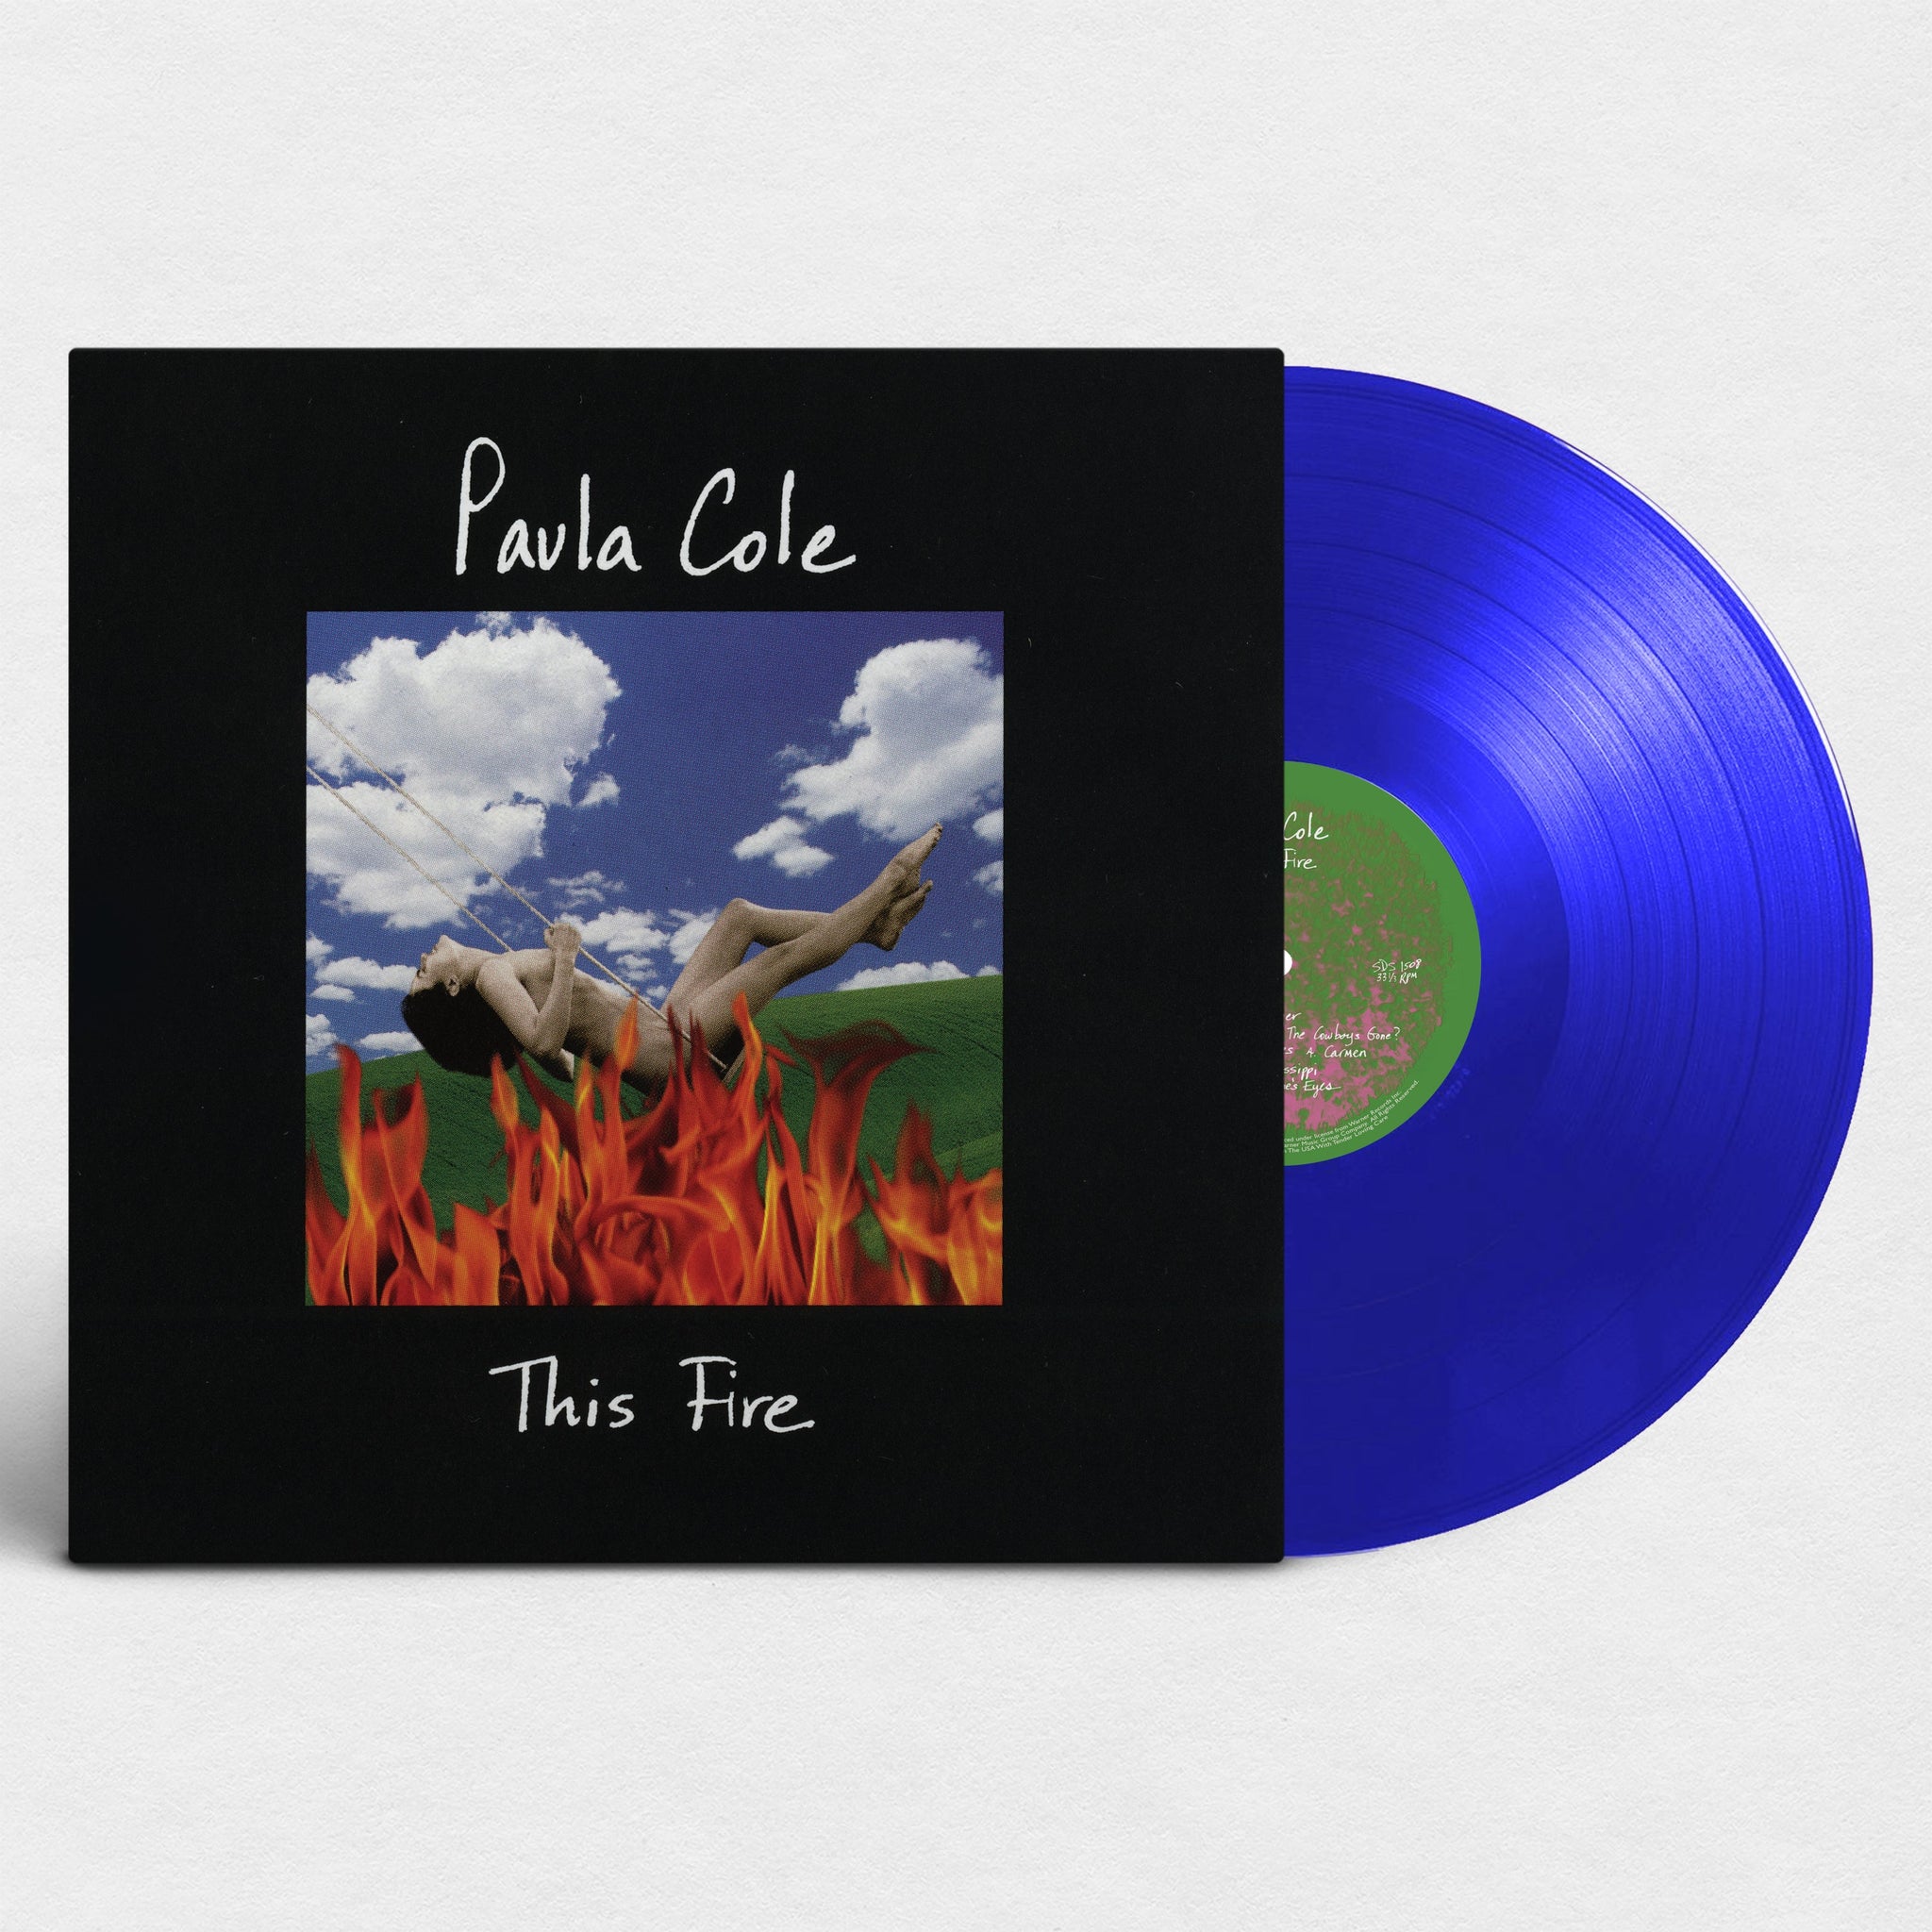 Paula Cole "This Fire" - Translucent Blue [Ltd. Quantities] Now Shipping